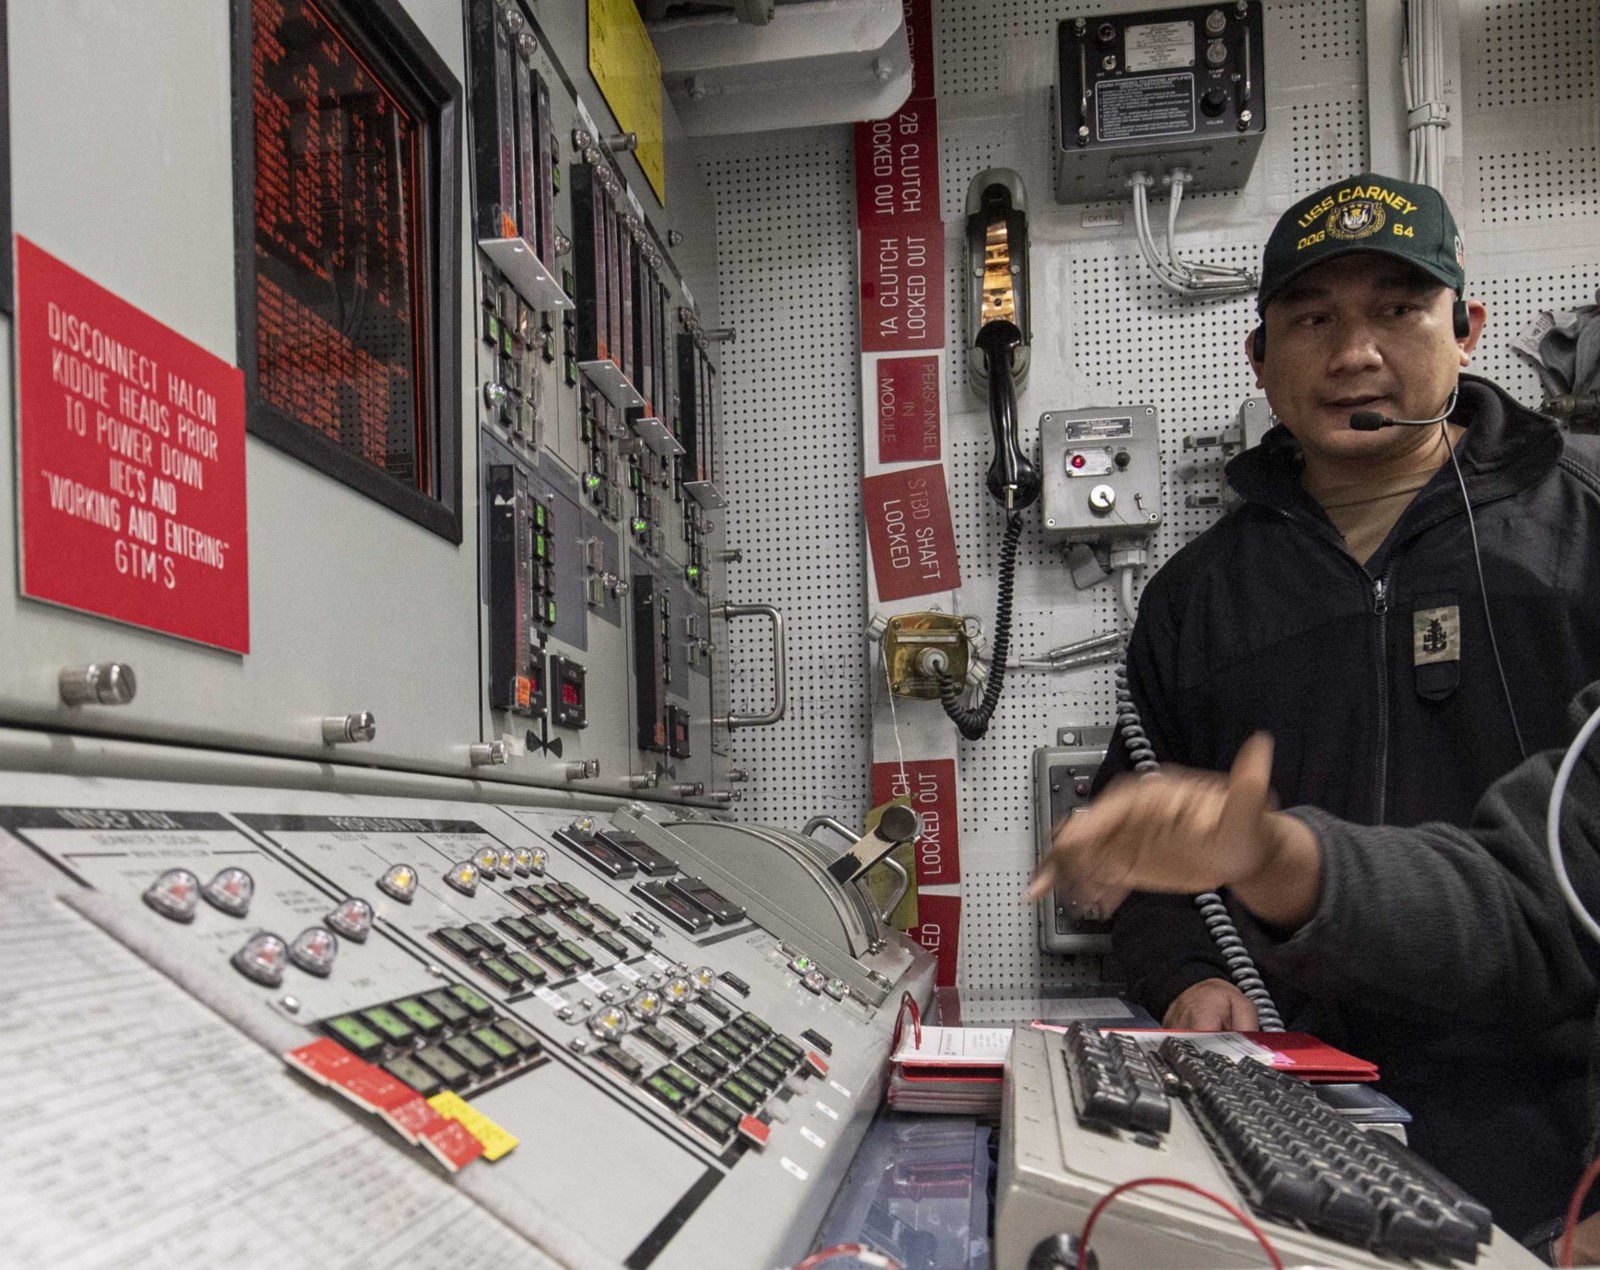 ddg-64 uss carney guided missile destroyer arleigh burke class 99 propulsion control console